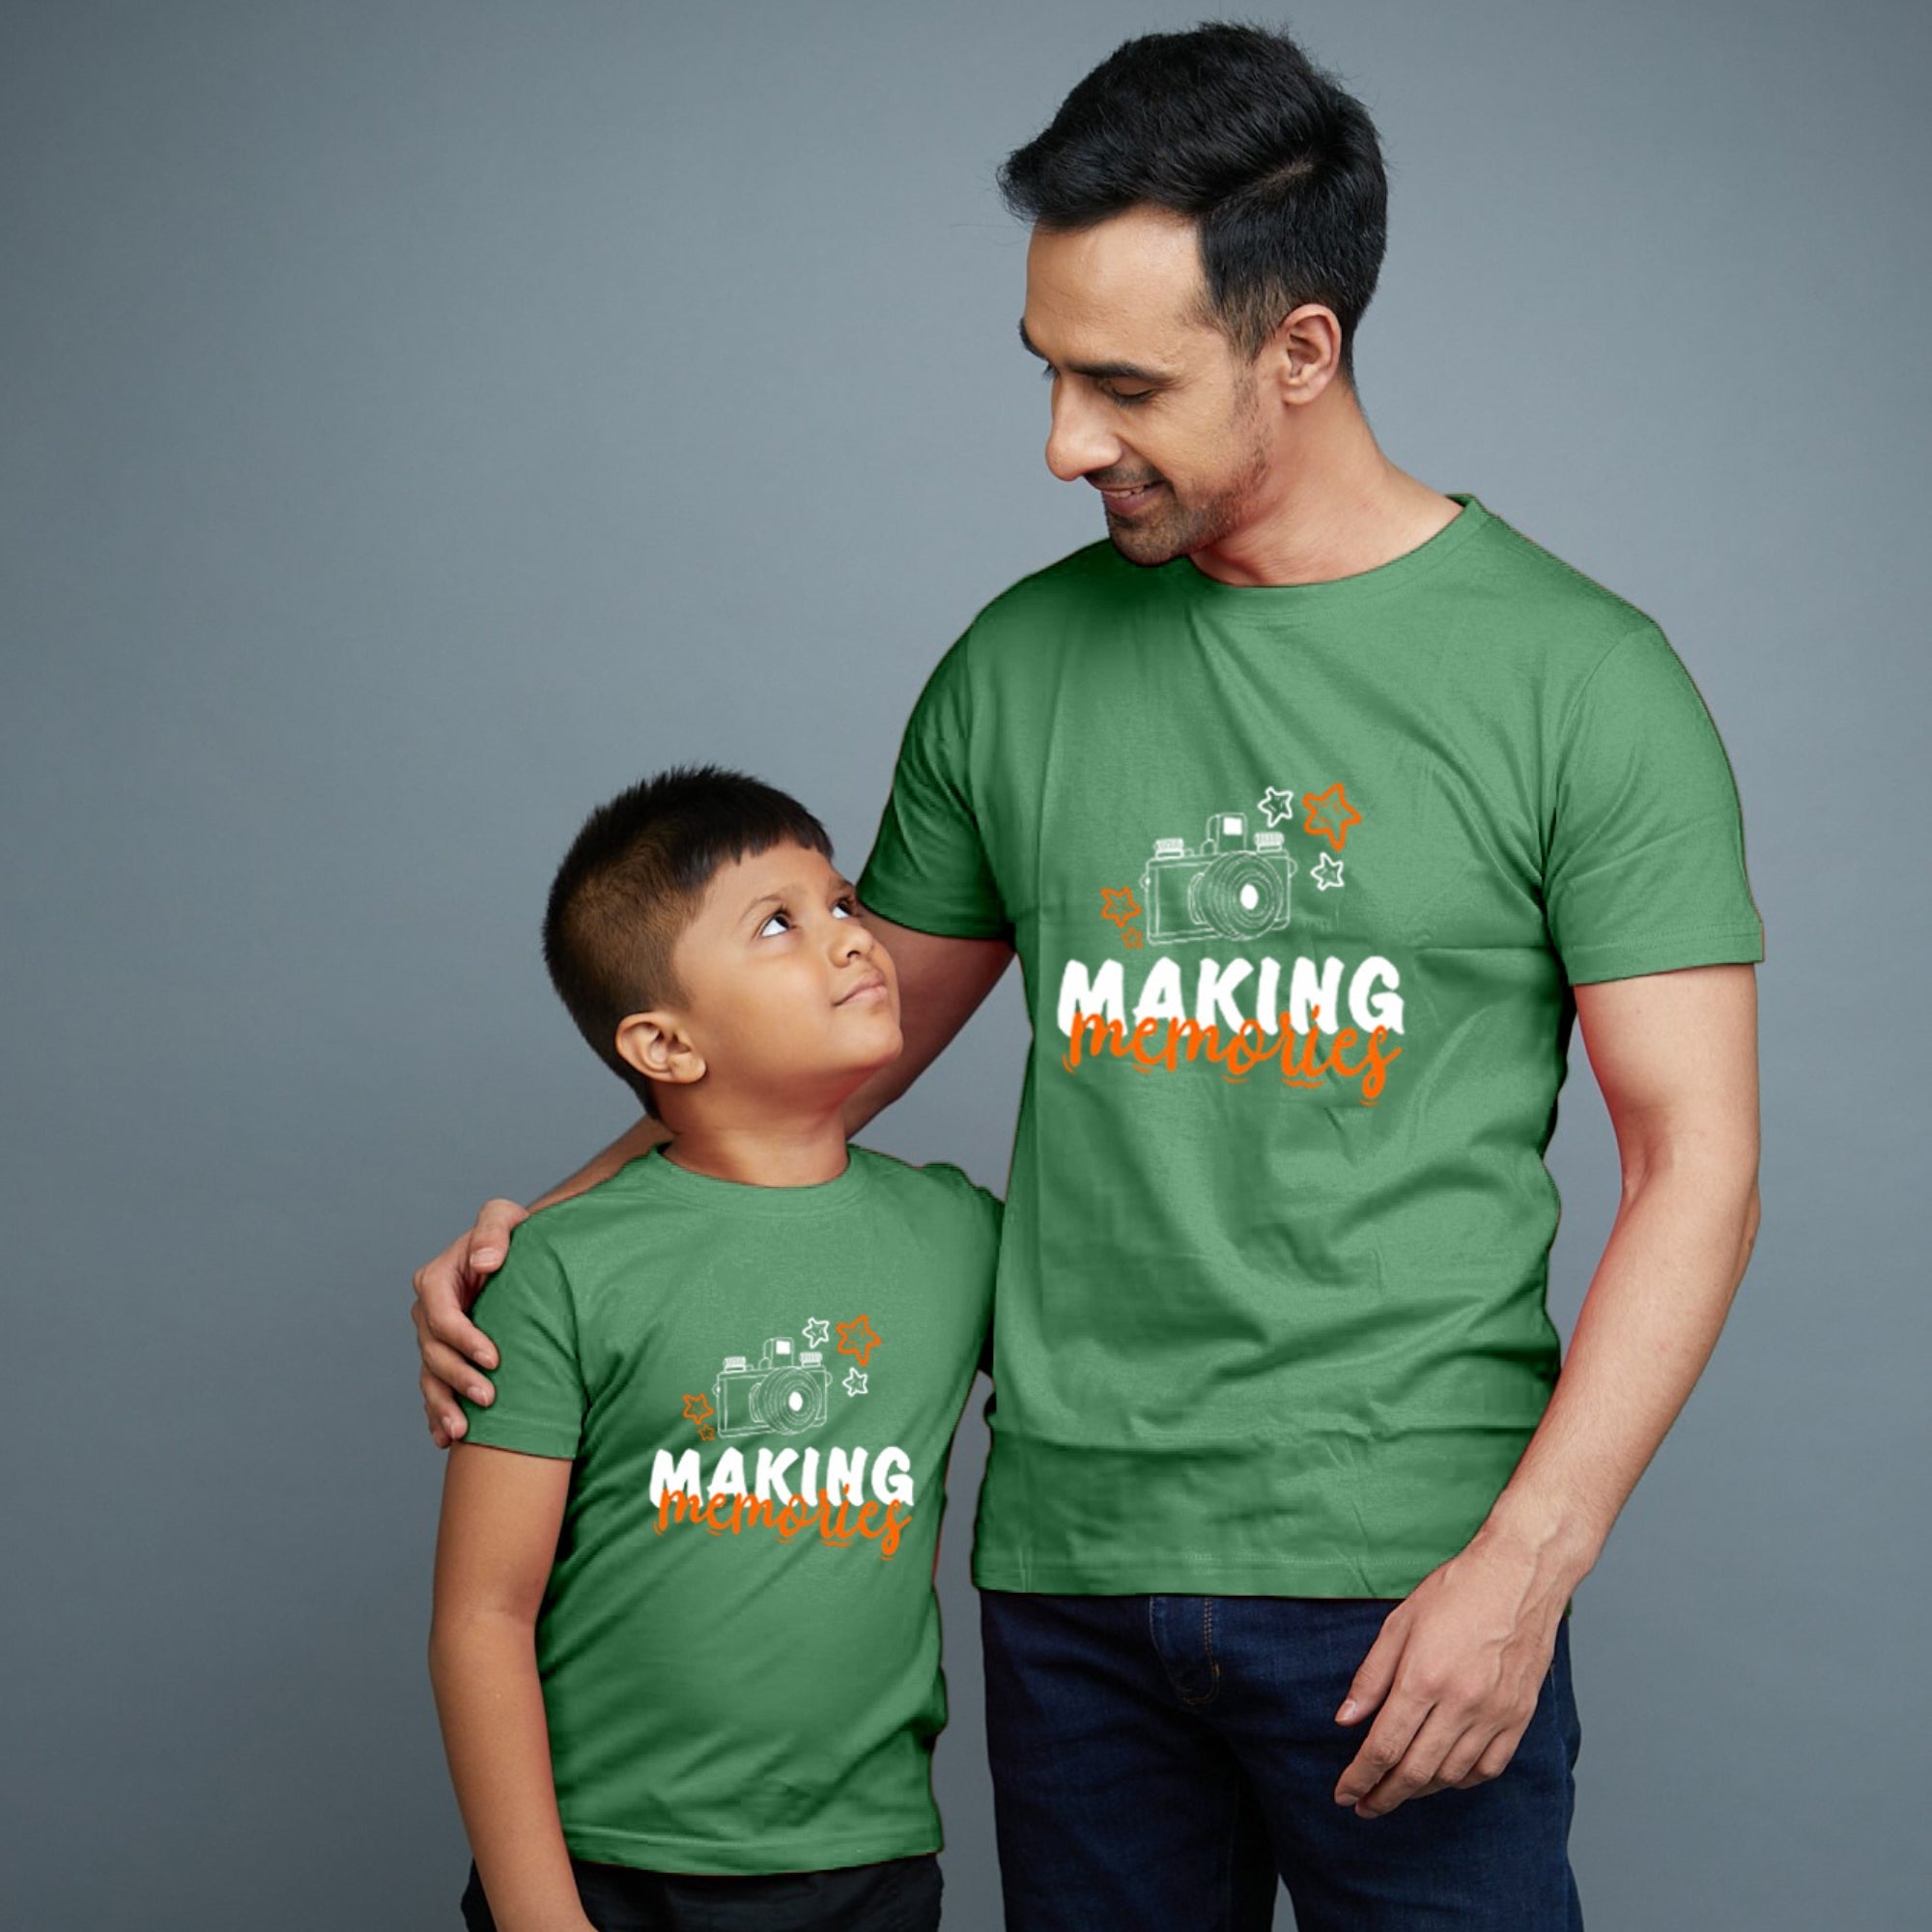 Family of 2 t shirt for Dad Son in Green Colour- Making Memories Variant